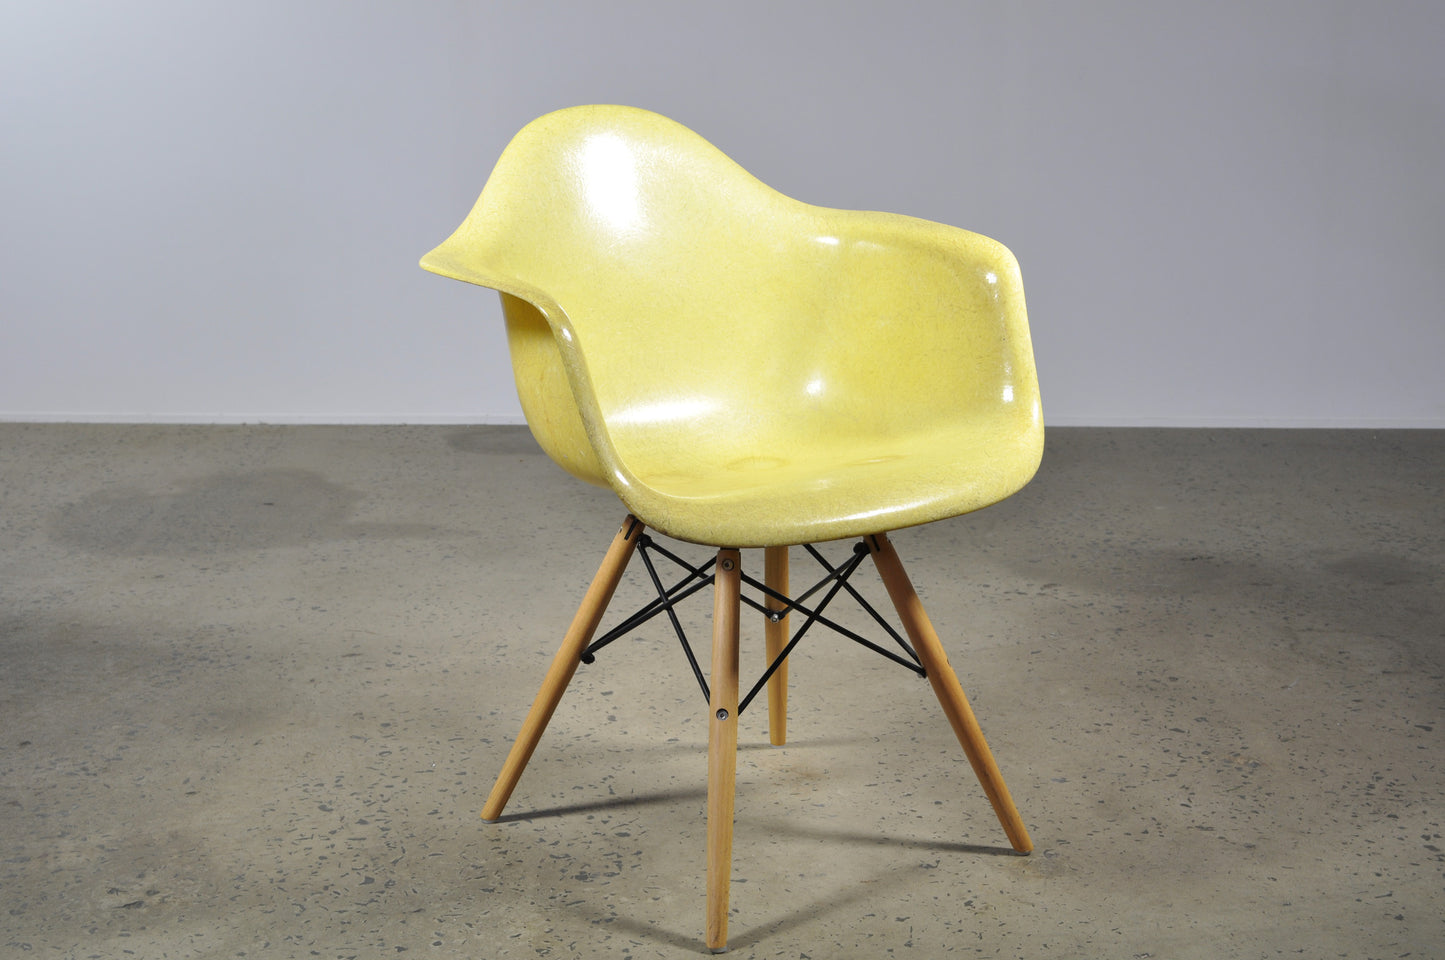 Eames fibre glass lounge style shell on a wooden dining chair base.